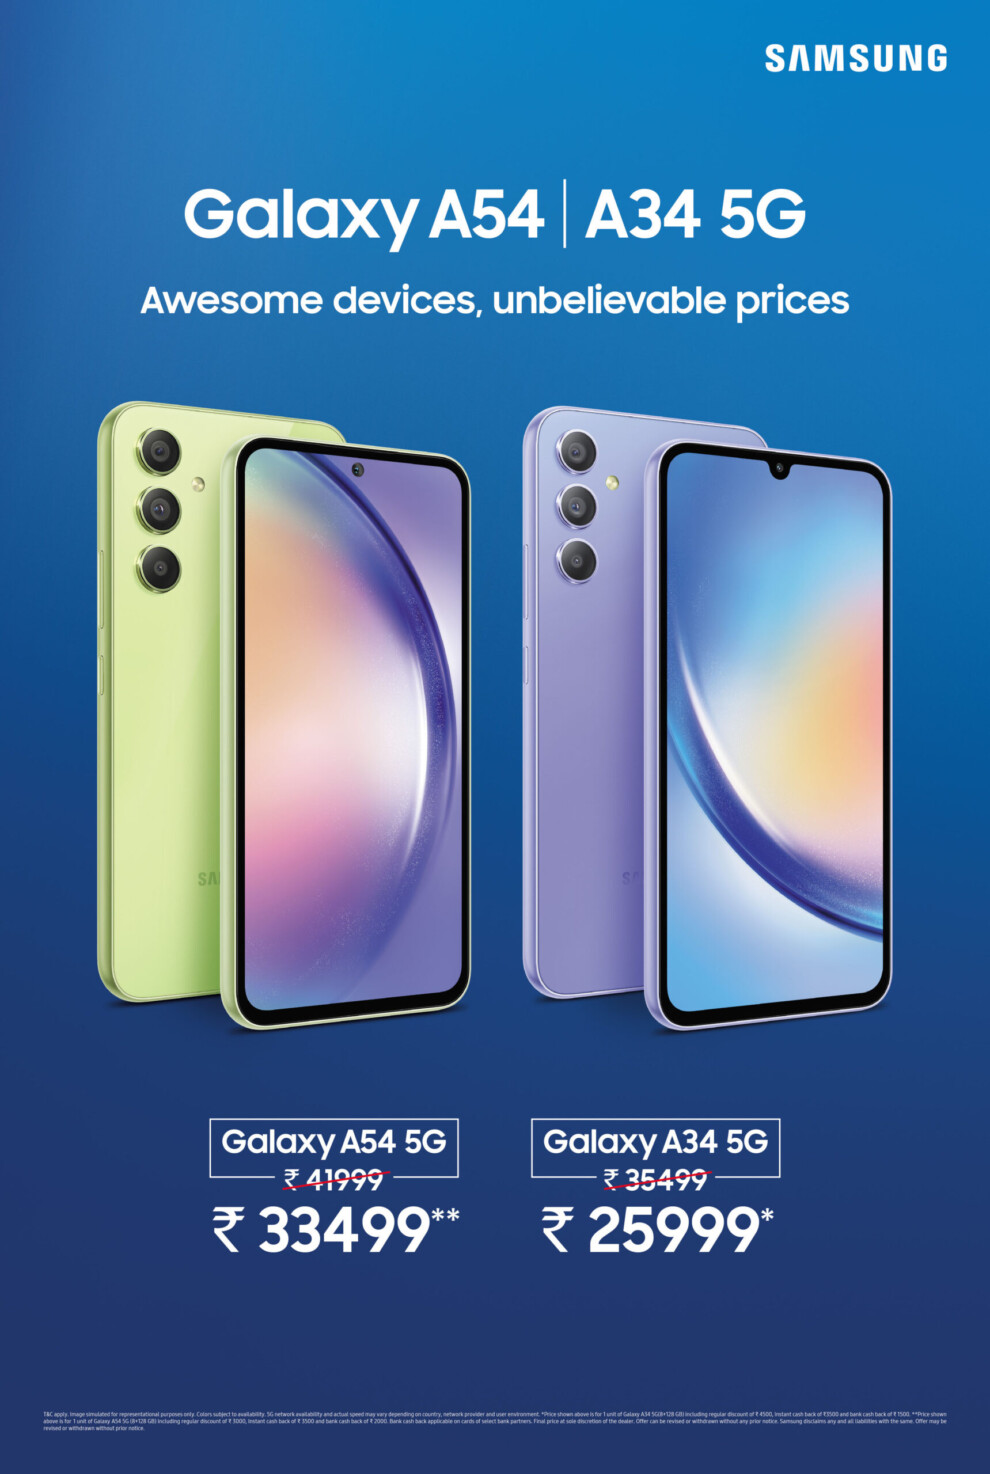 Samsung Unveils Offers on Galaxy A54 5G and A34 5G Models